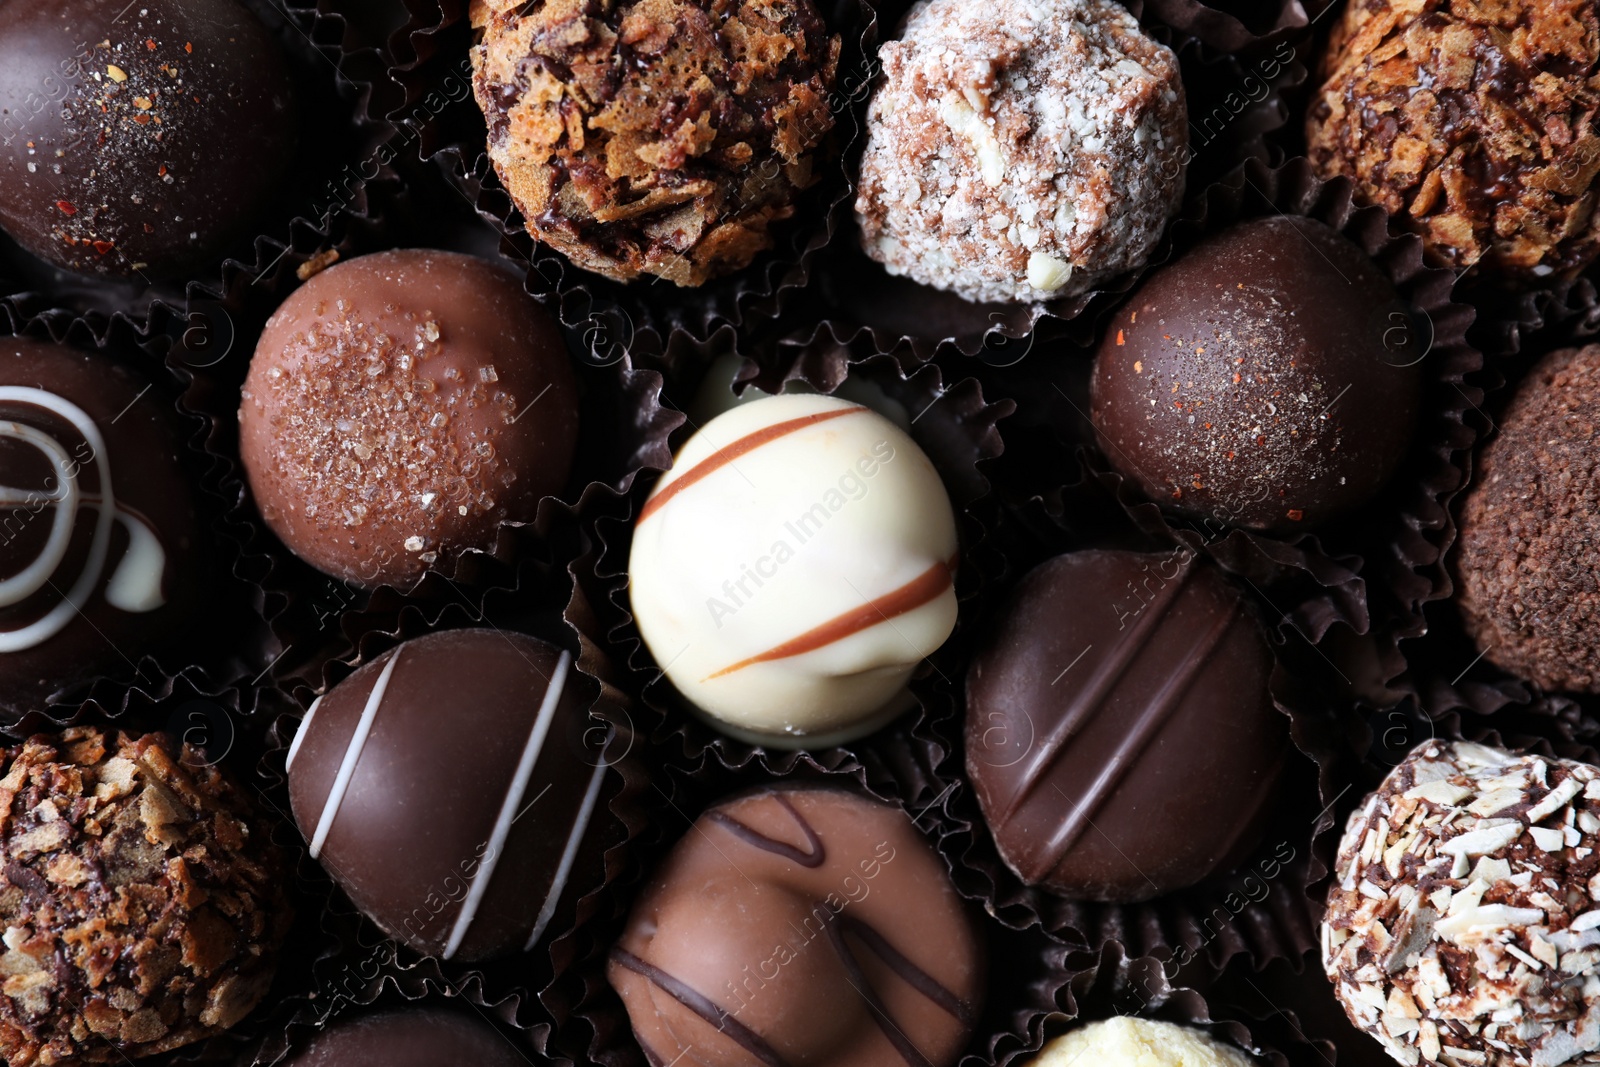 Photo of Different tasty chocolate candies as background, top view